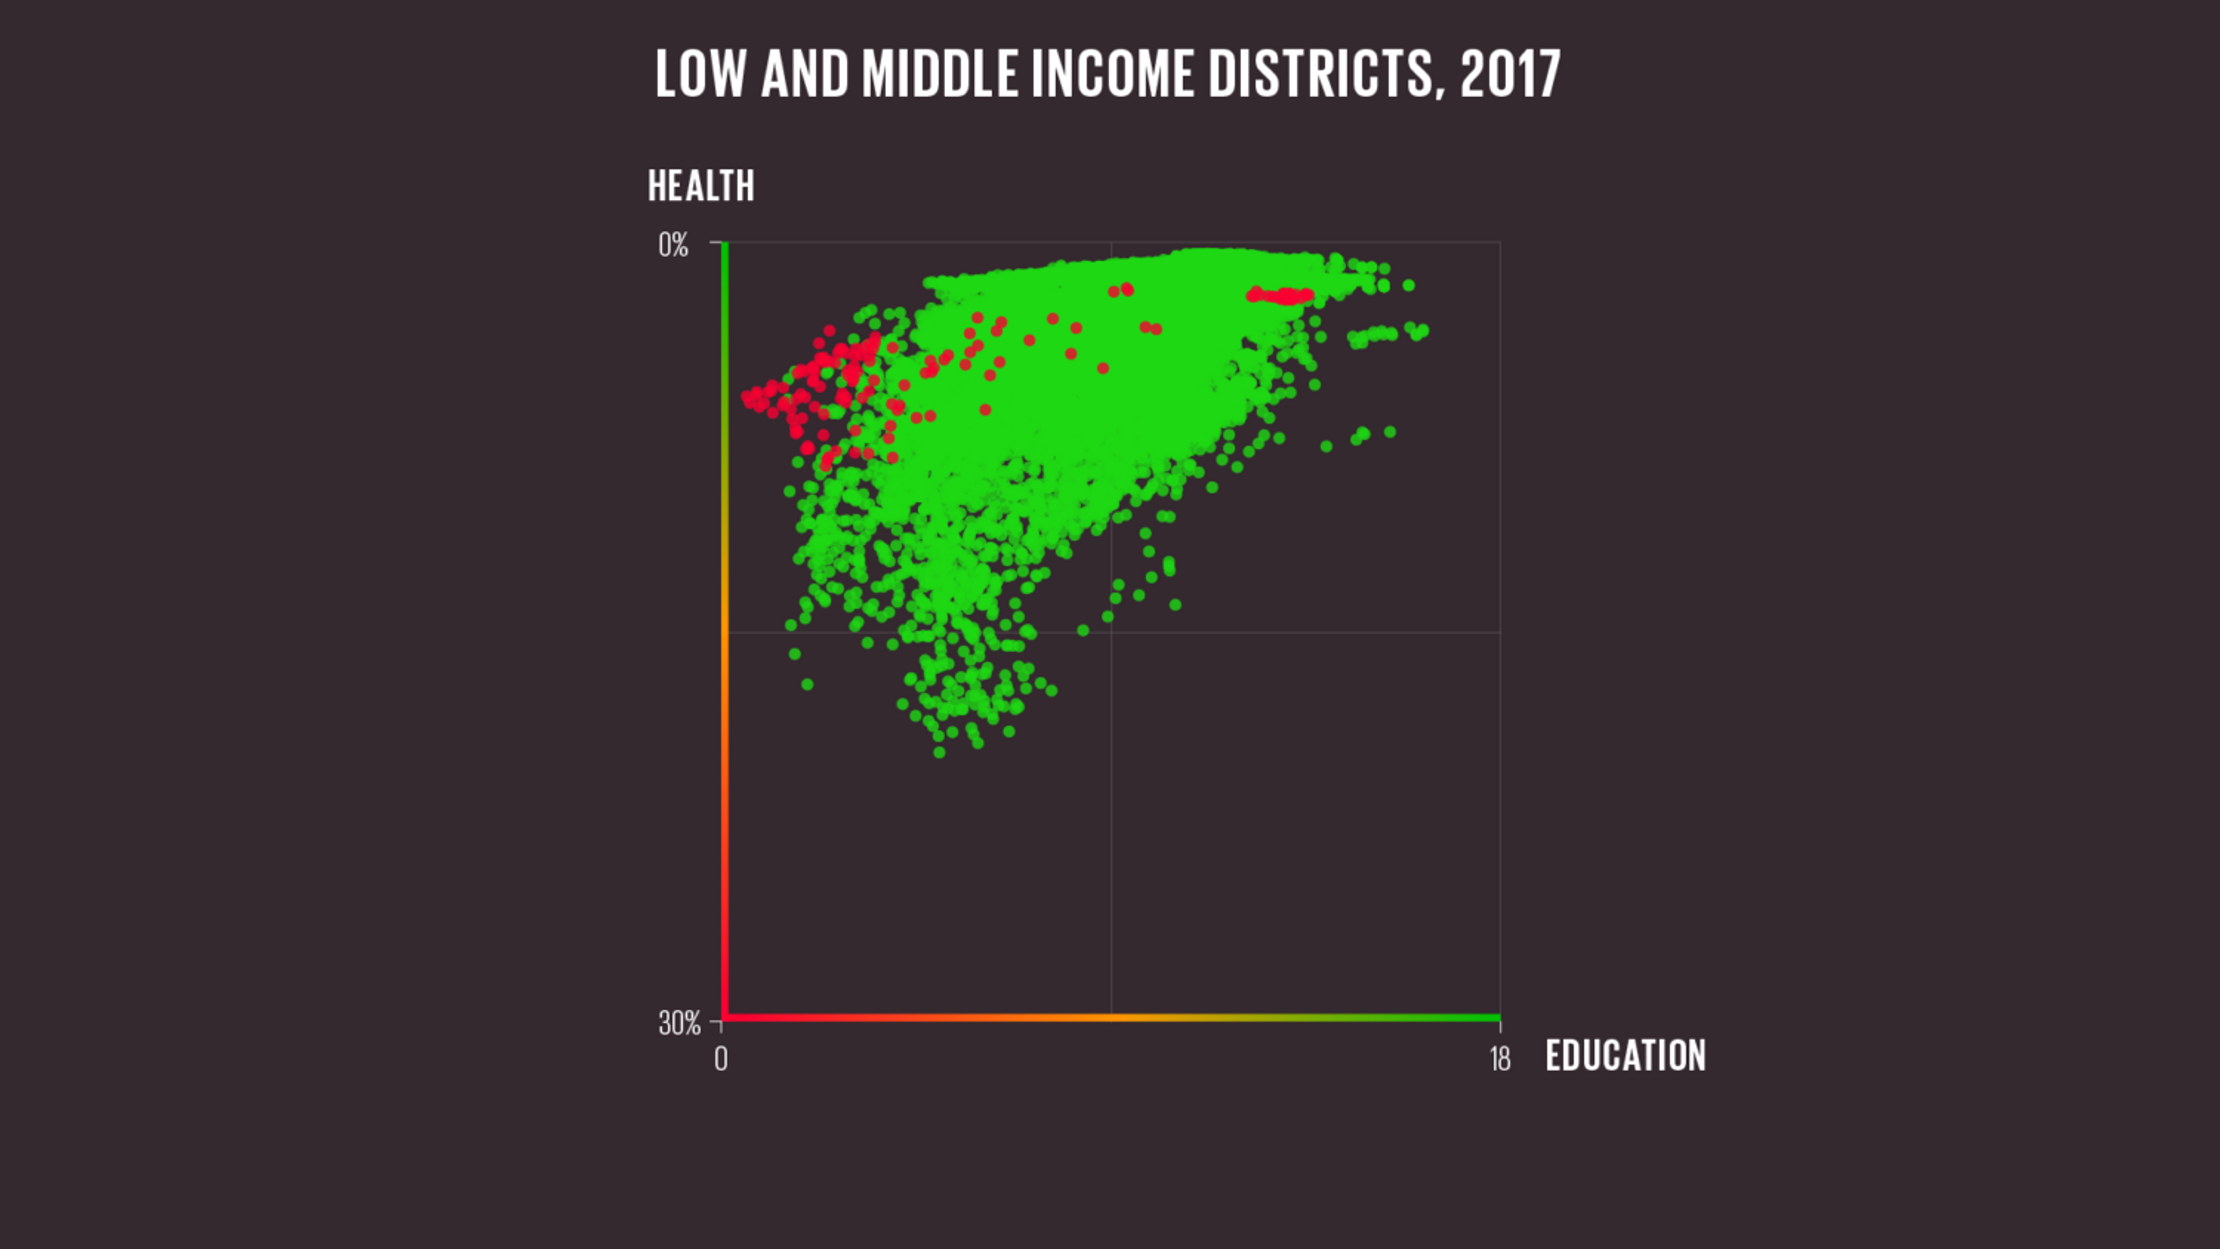 A scatter plot where each dot is a subnational district in a low or middle income country in 2017. The y axis shows children dying before the 5 years old, at 30% at the bottom and 0% at the top. The x-axis shows years of education running from 0 to 18. Most countries in green indicate they improved in both areas. A few fots in red did not. These tend to be grouped more towards the low end of the x-axis for education.